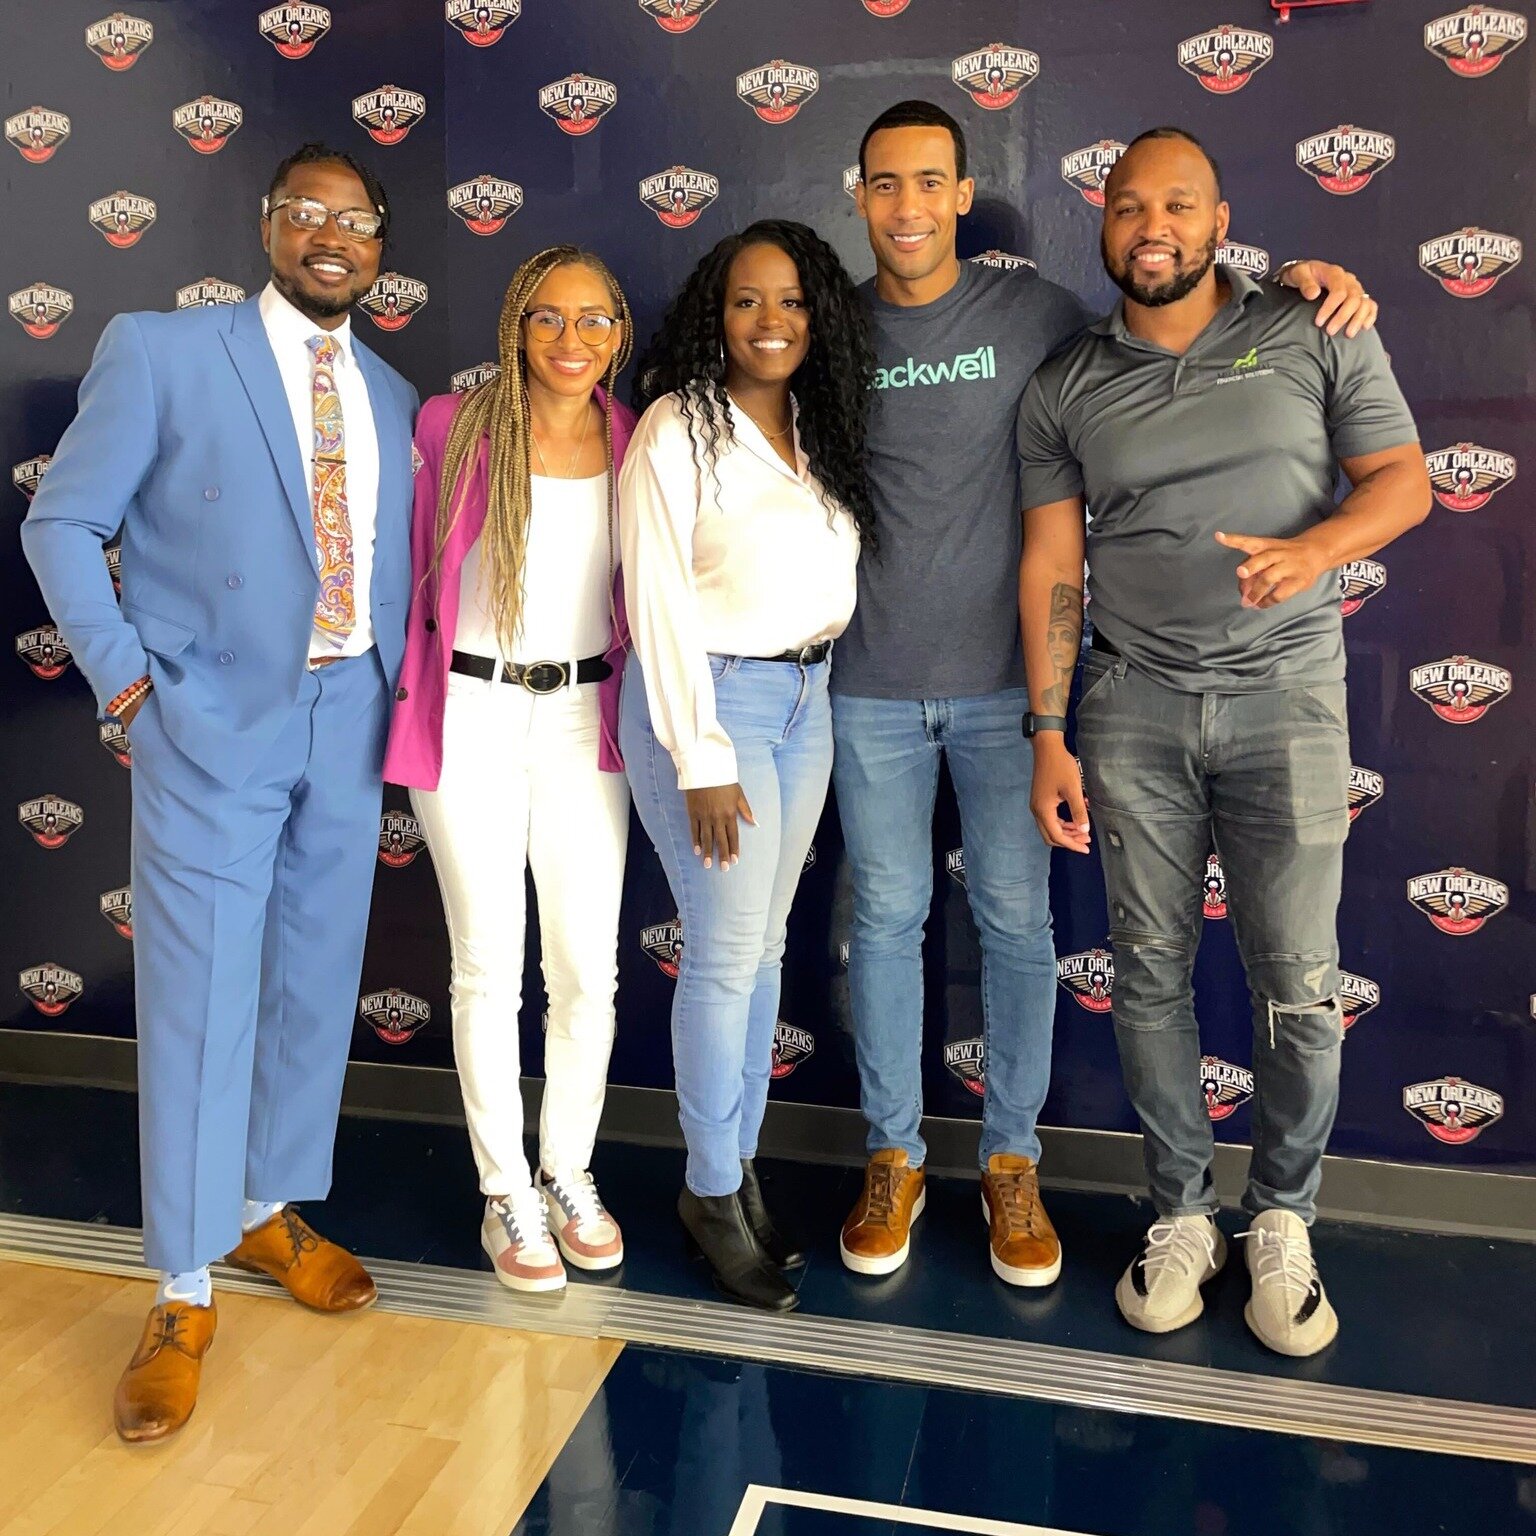 🔥New Orleans brought the energy last Thursday at the Pelicans Financial Literacy Workshop. Thank you to everyone who came out and made this possible. #BuildBlackWealth @theorganizedmoney @jbutler718 @classicquint @danadisrupts @pelicansnba